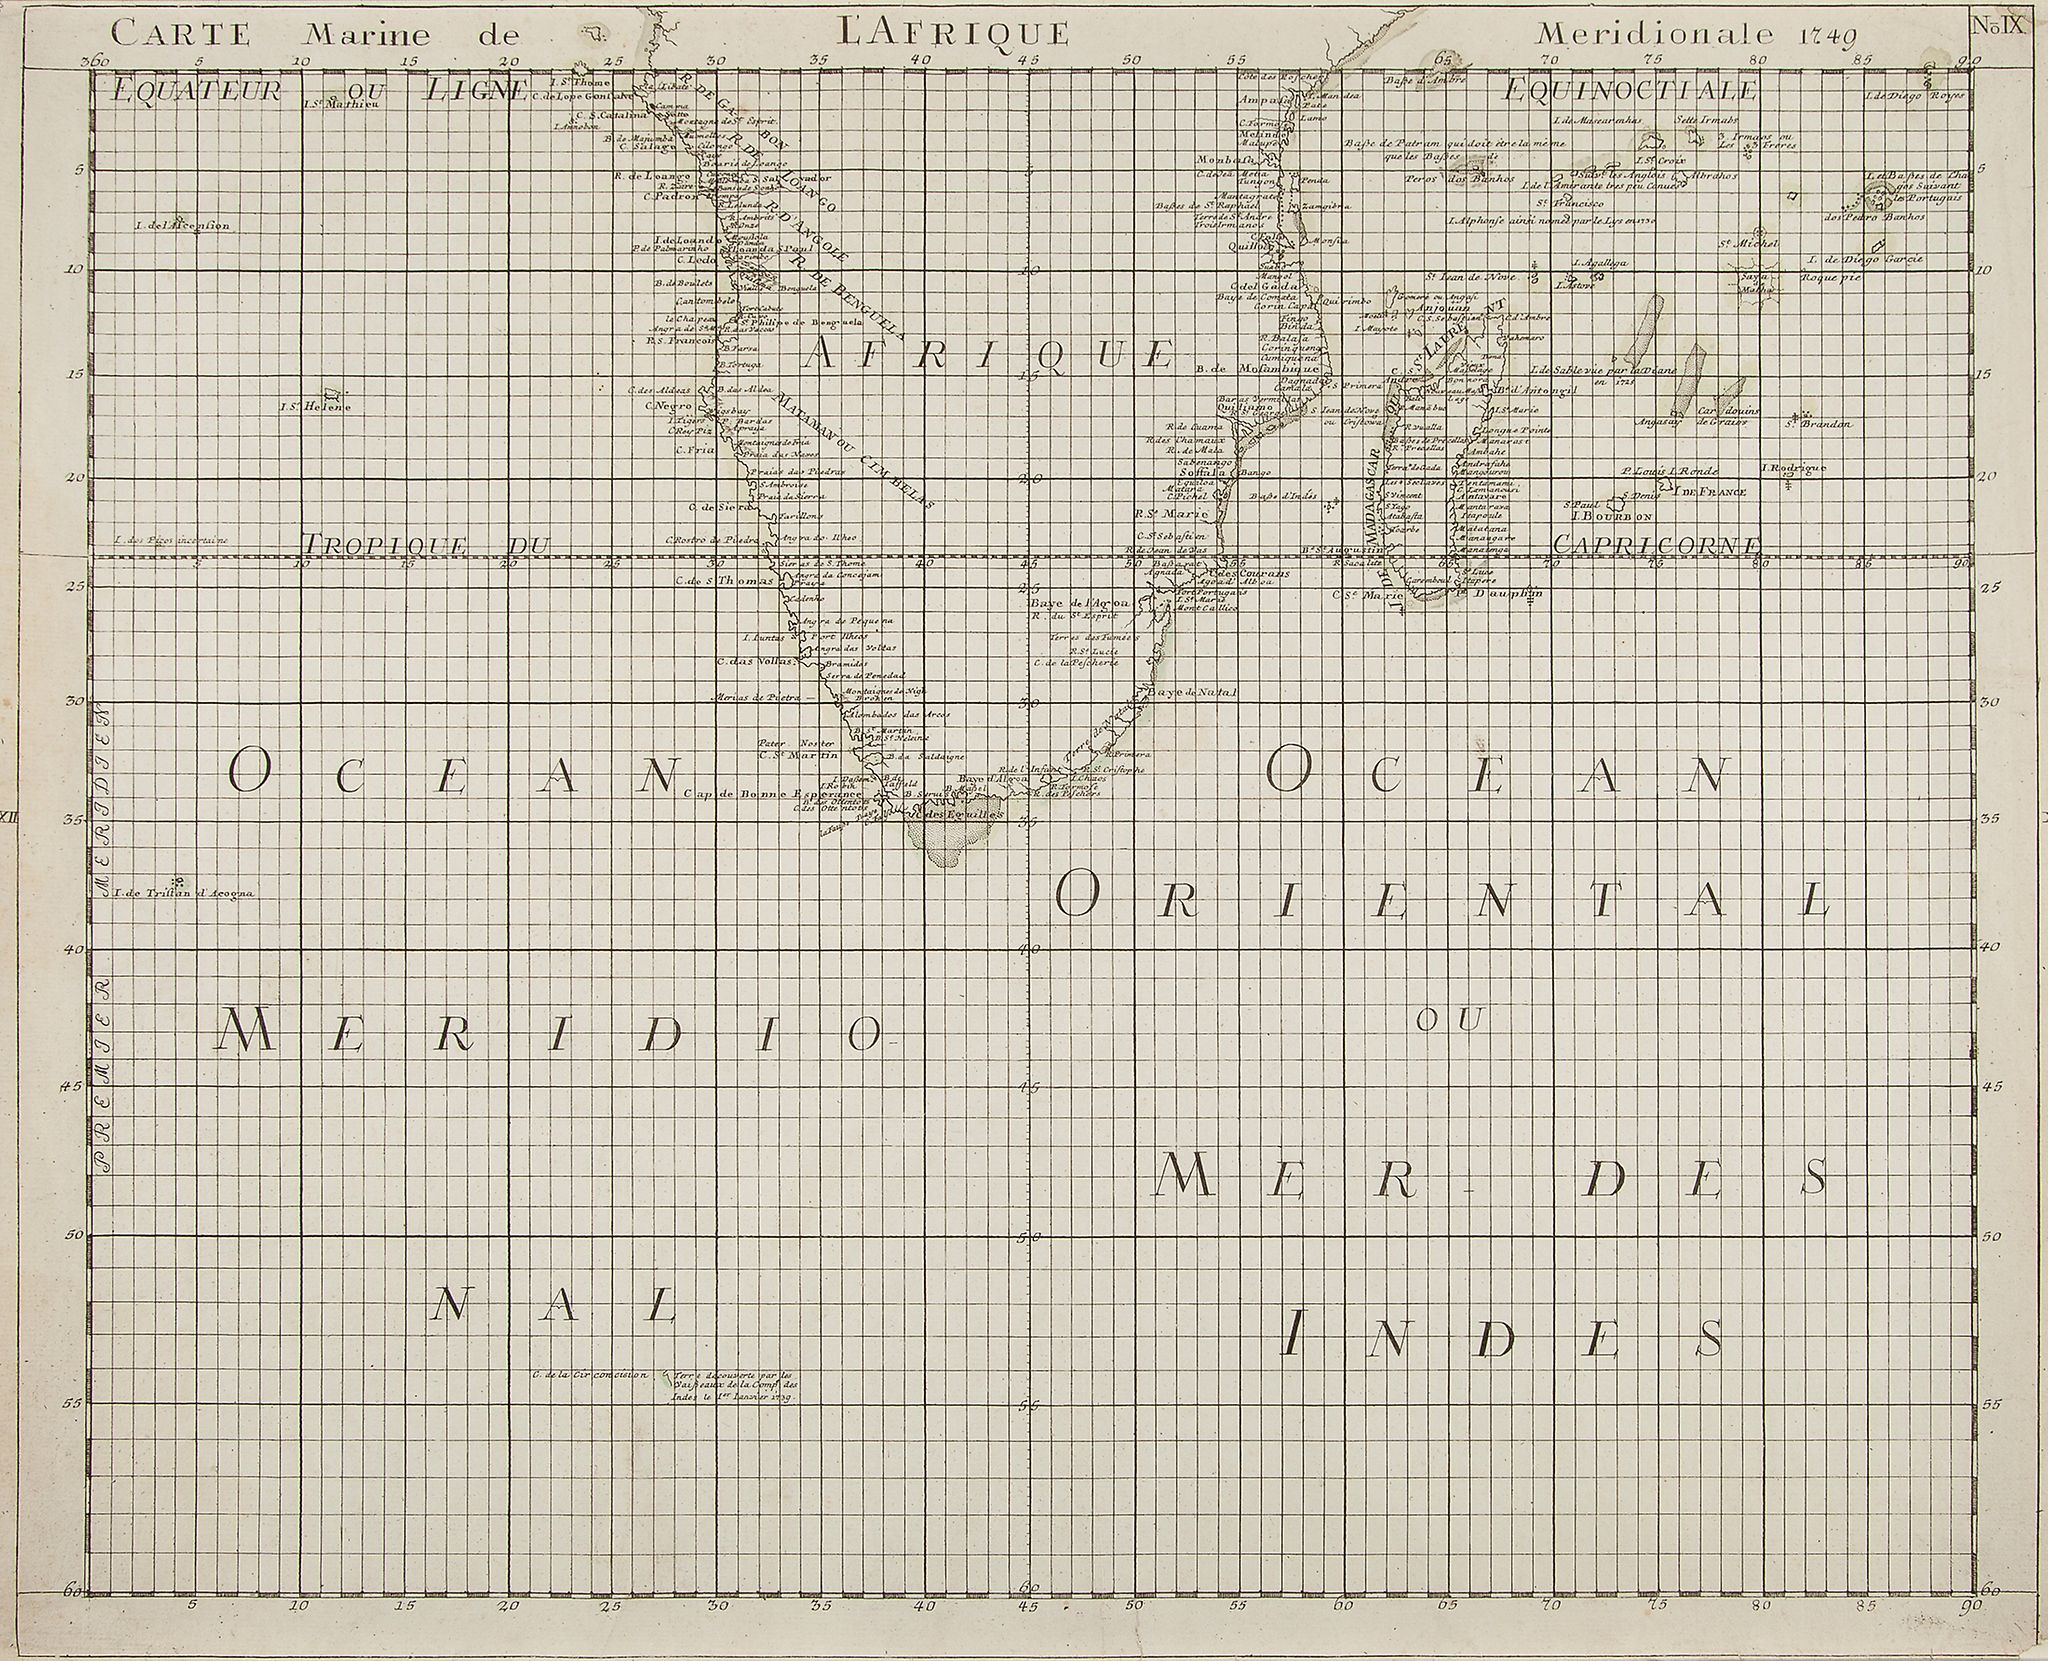 Bruckner (Isaak) - 2 sheets from the Nouvel Atlas de la Marine to form the continent of Africa, - Image 2 of 2